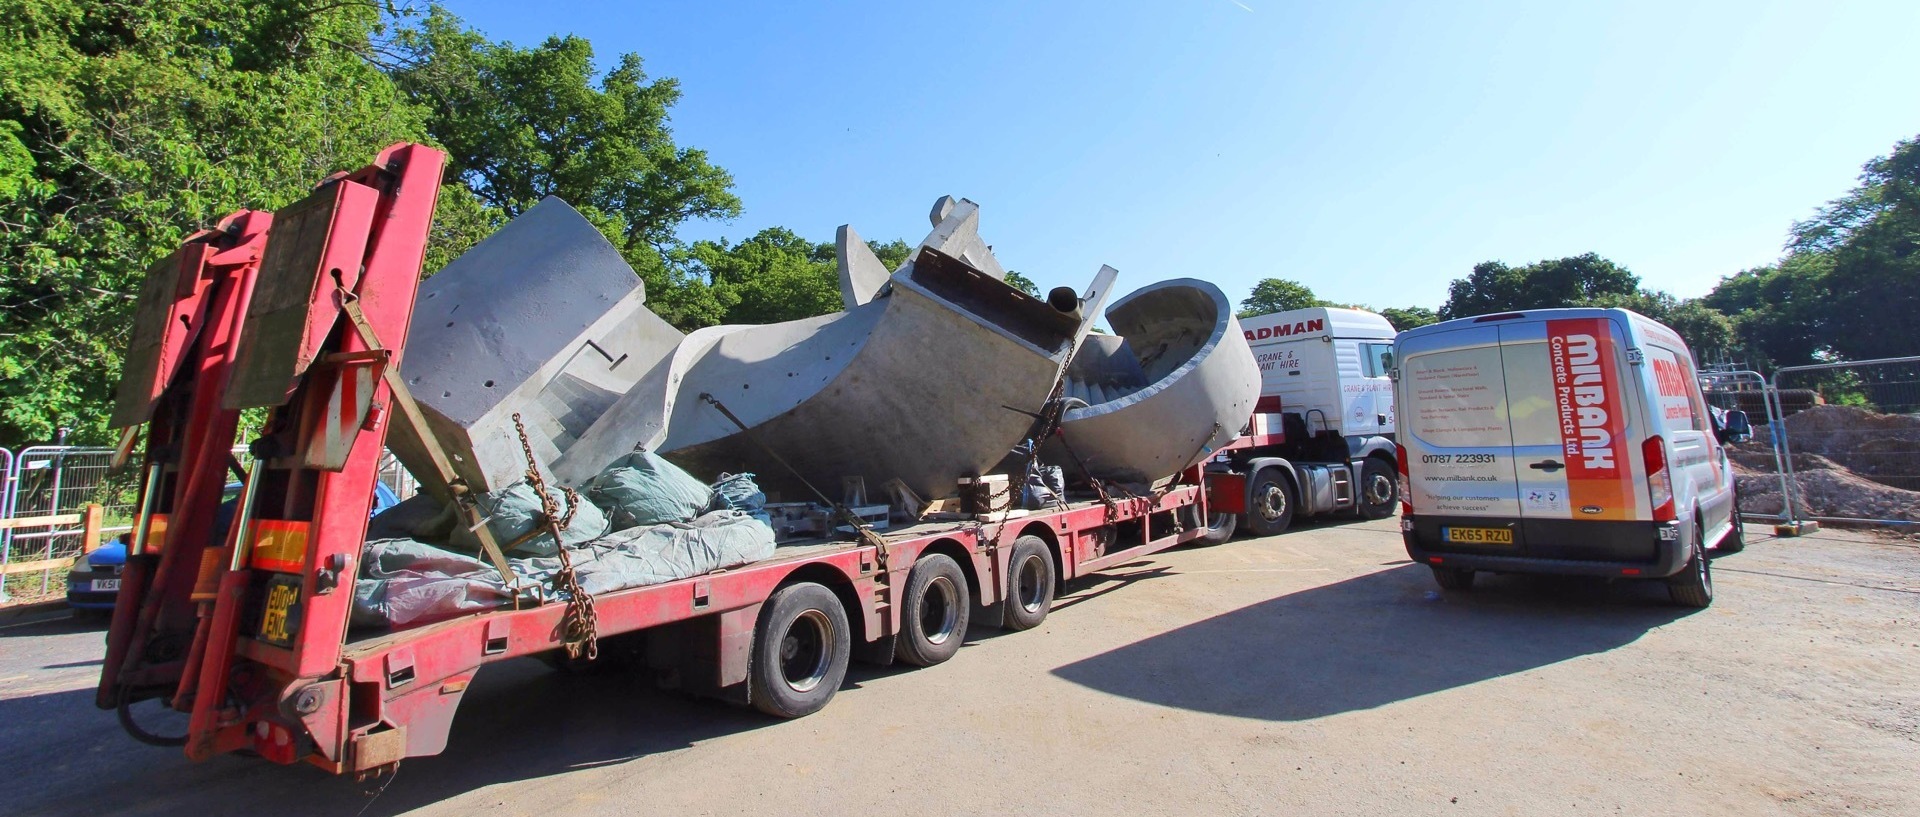 Precast Concrete Curved Stairs Transported on Lorry